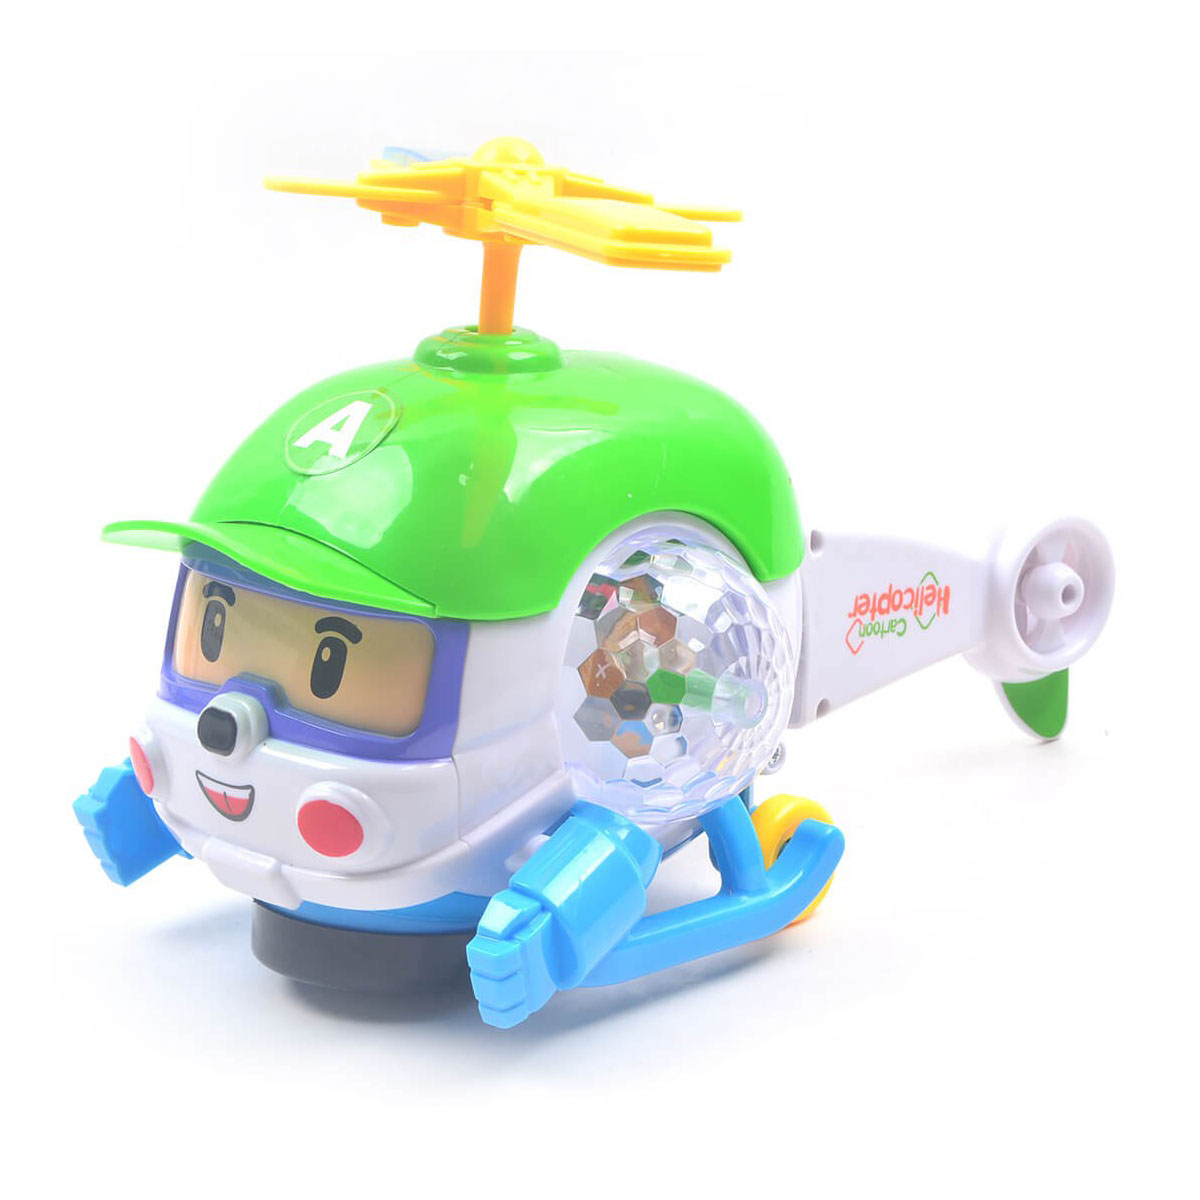 Cartoon Helicopter With Lighting & Musical Sound